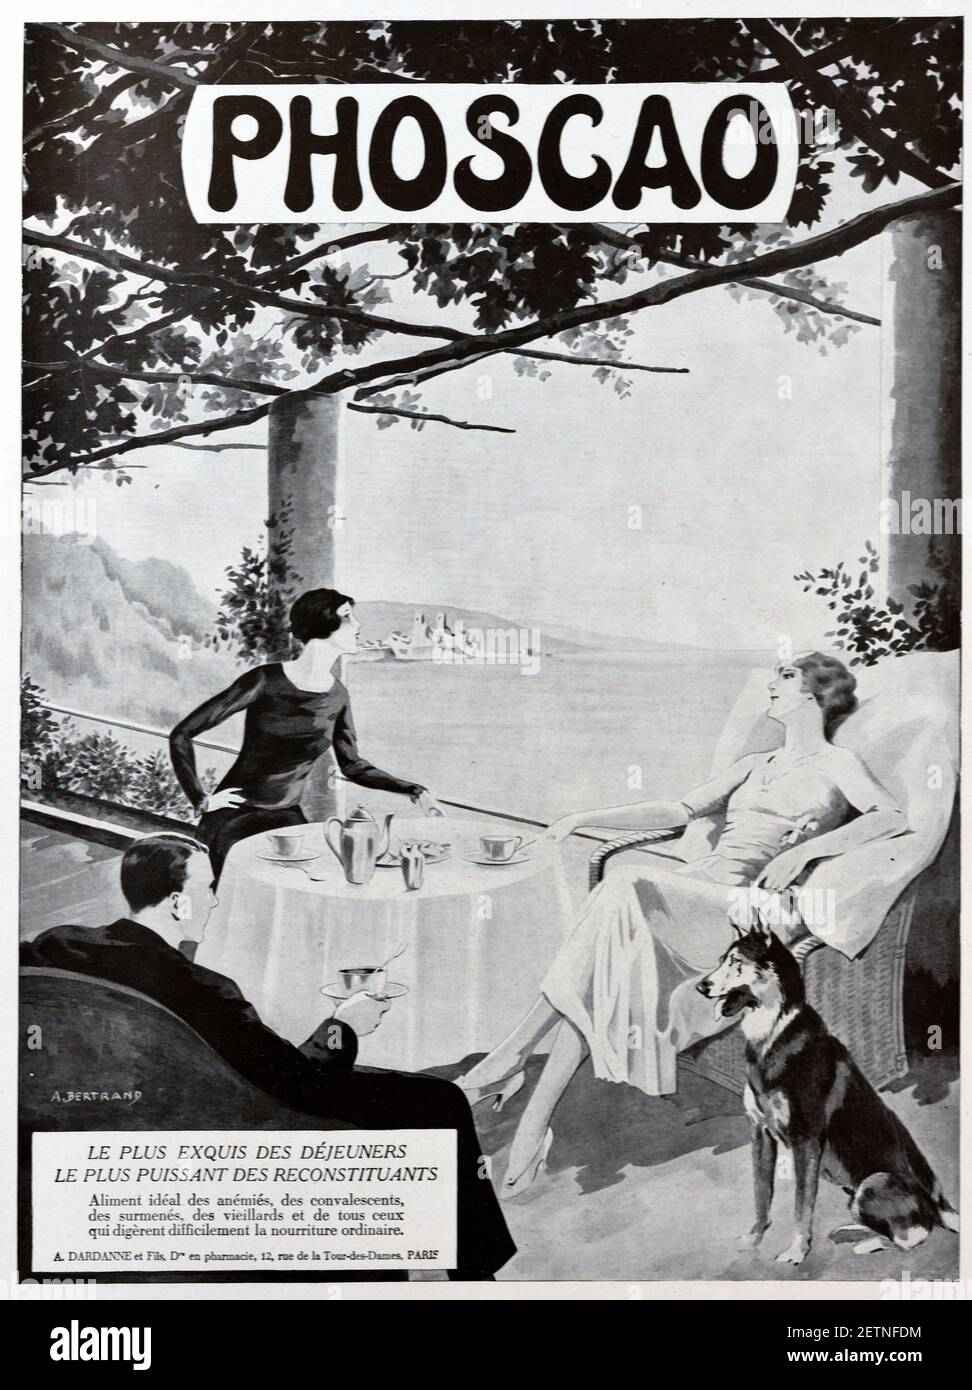 Vintage Advert, Advertisement or Publicity for Phoscao, a Chocolate Flavoured Breakfast Drink France 1931. The illustration Shows a Man & a Couple of Flapper Women, probably Tourists, Taking Breakfast, Bruch or Afternoon Tea Against the Backdrop of Antibes on the Côte-d'Azur or French Riviera France. Stock Photo